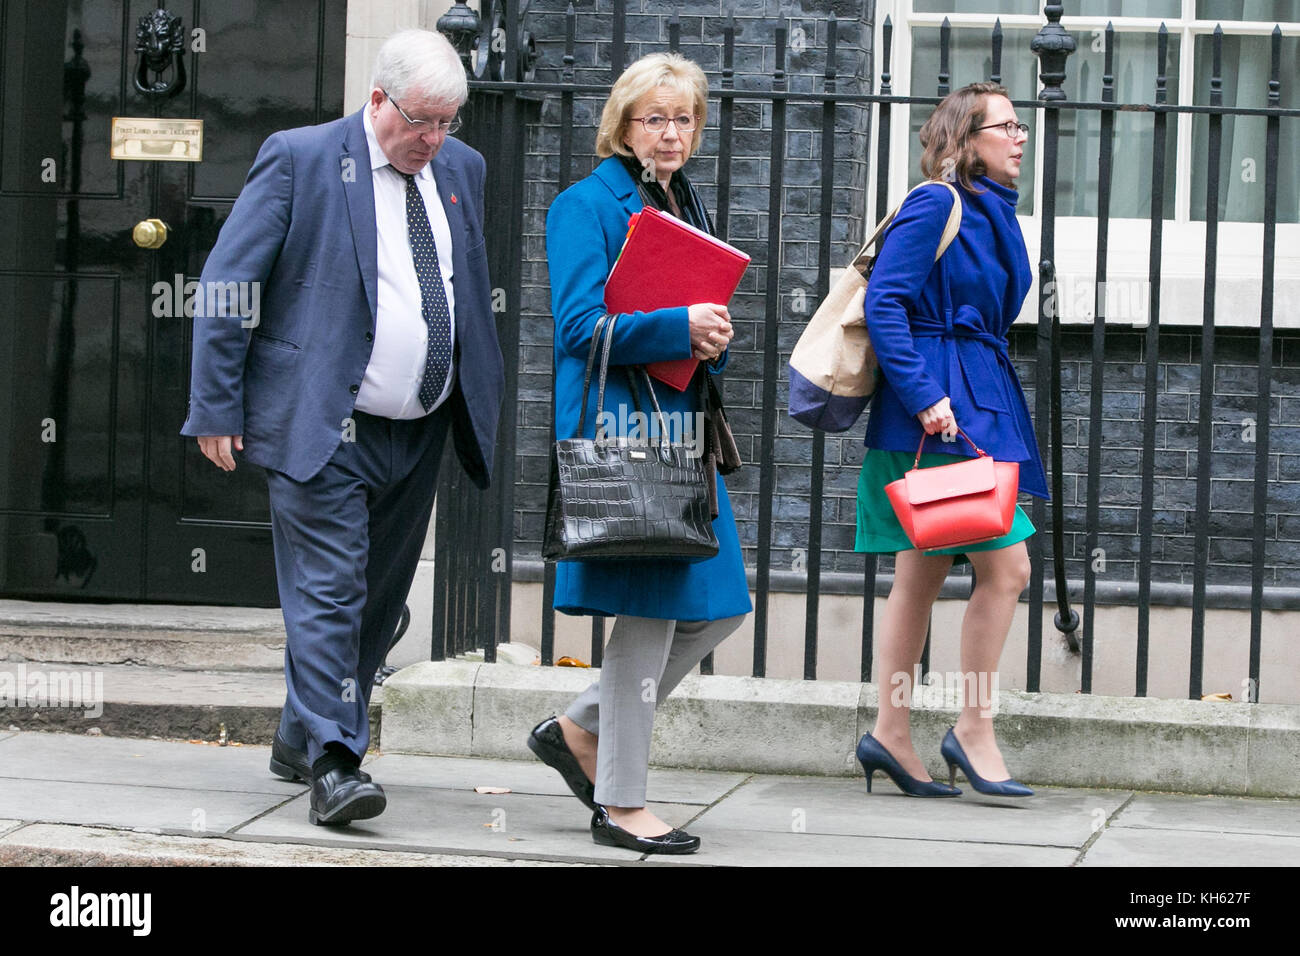 Downign Street. London, UK. 14th Nov, 2017. Andrea Leadsom, Lord President of the Council, and Leader of the House of Commons, Baroness Evans of Bowes Park, Lord Privy Seal, and Leader of the House of Lords and Sir Patrick McLoughlin, Chancellor of the Duchy of Lancaster departs from No 10 Downing Street after attending the weekly Cabinet Meeting. Credit: Dinendra Haria/Alamy Live News Stock Photo